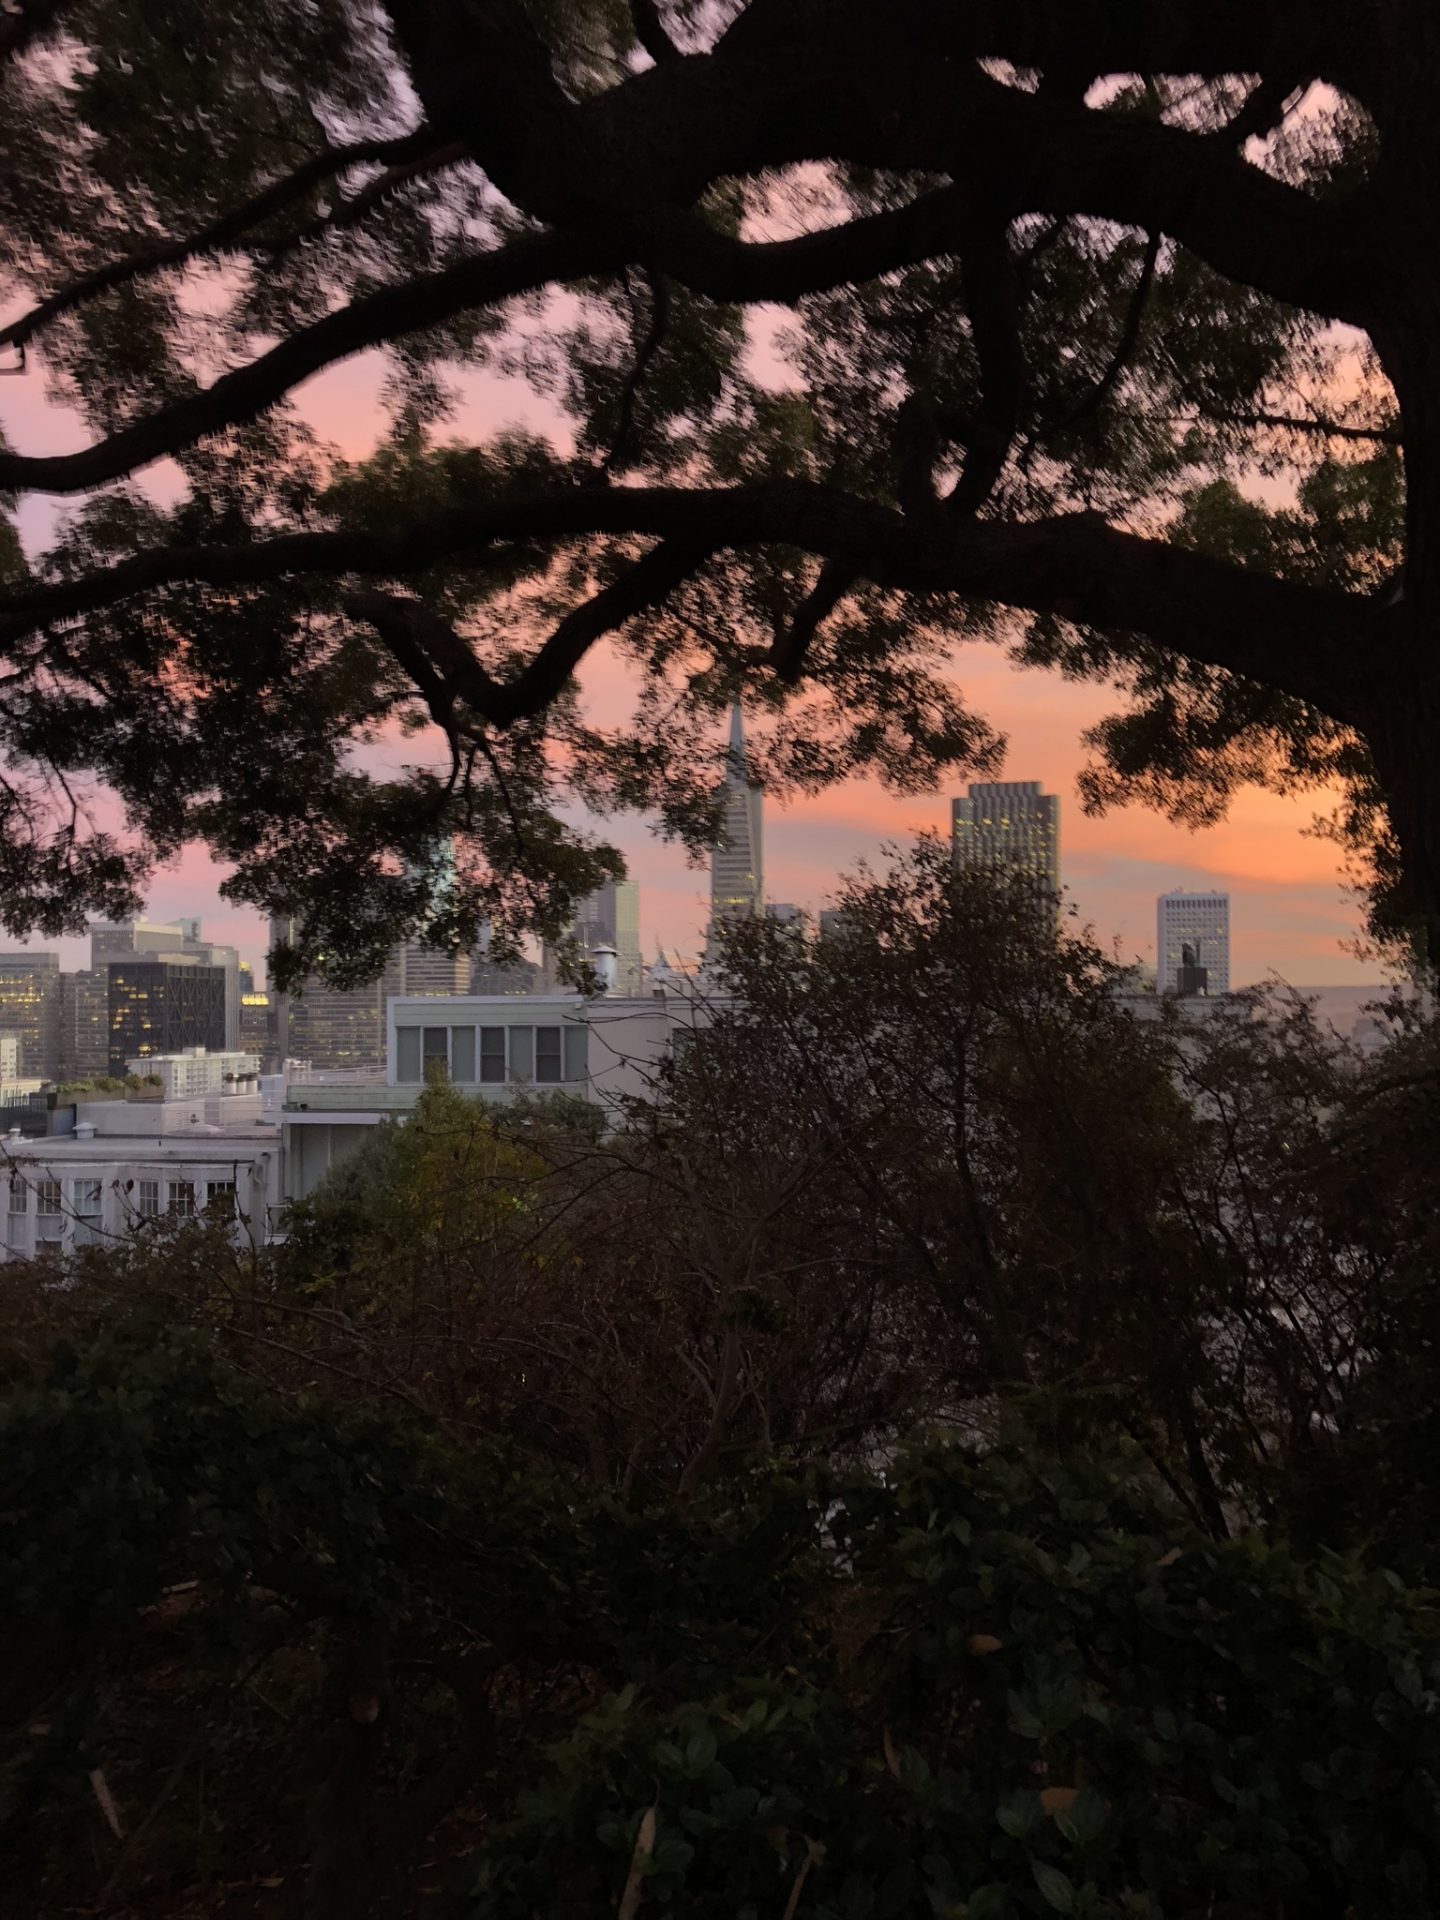 Sunset views from Coit Tower, San Francisco